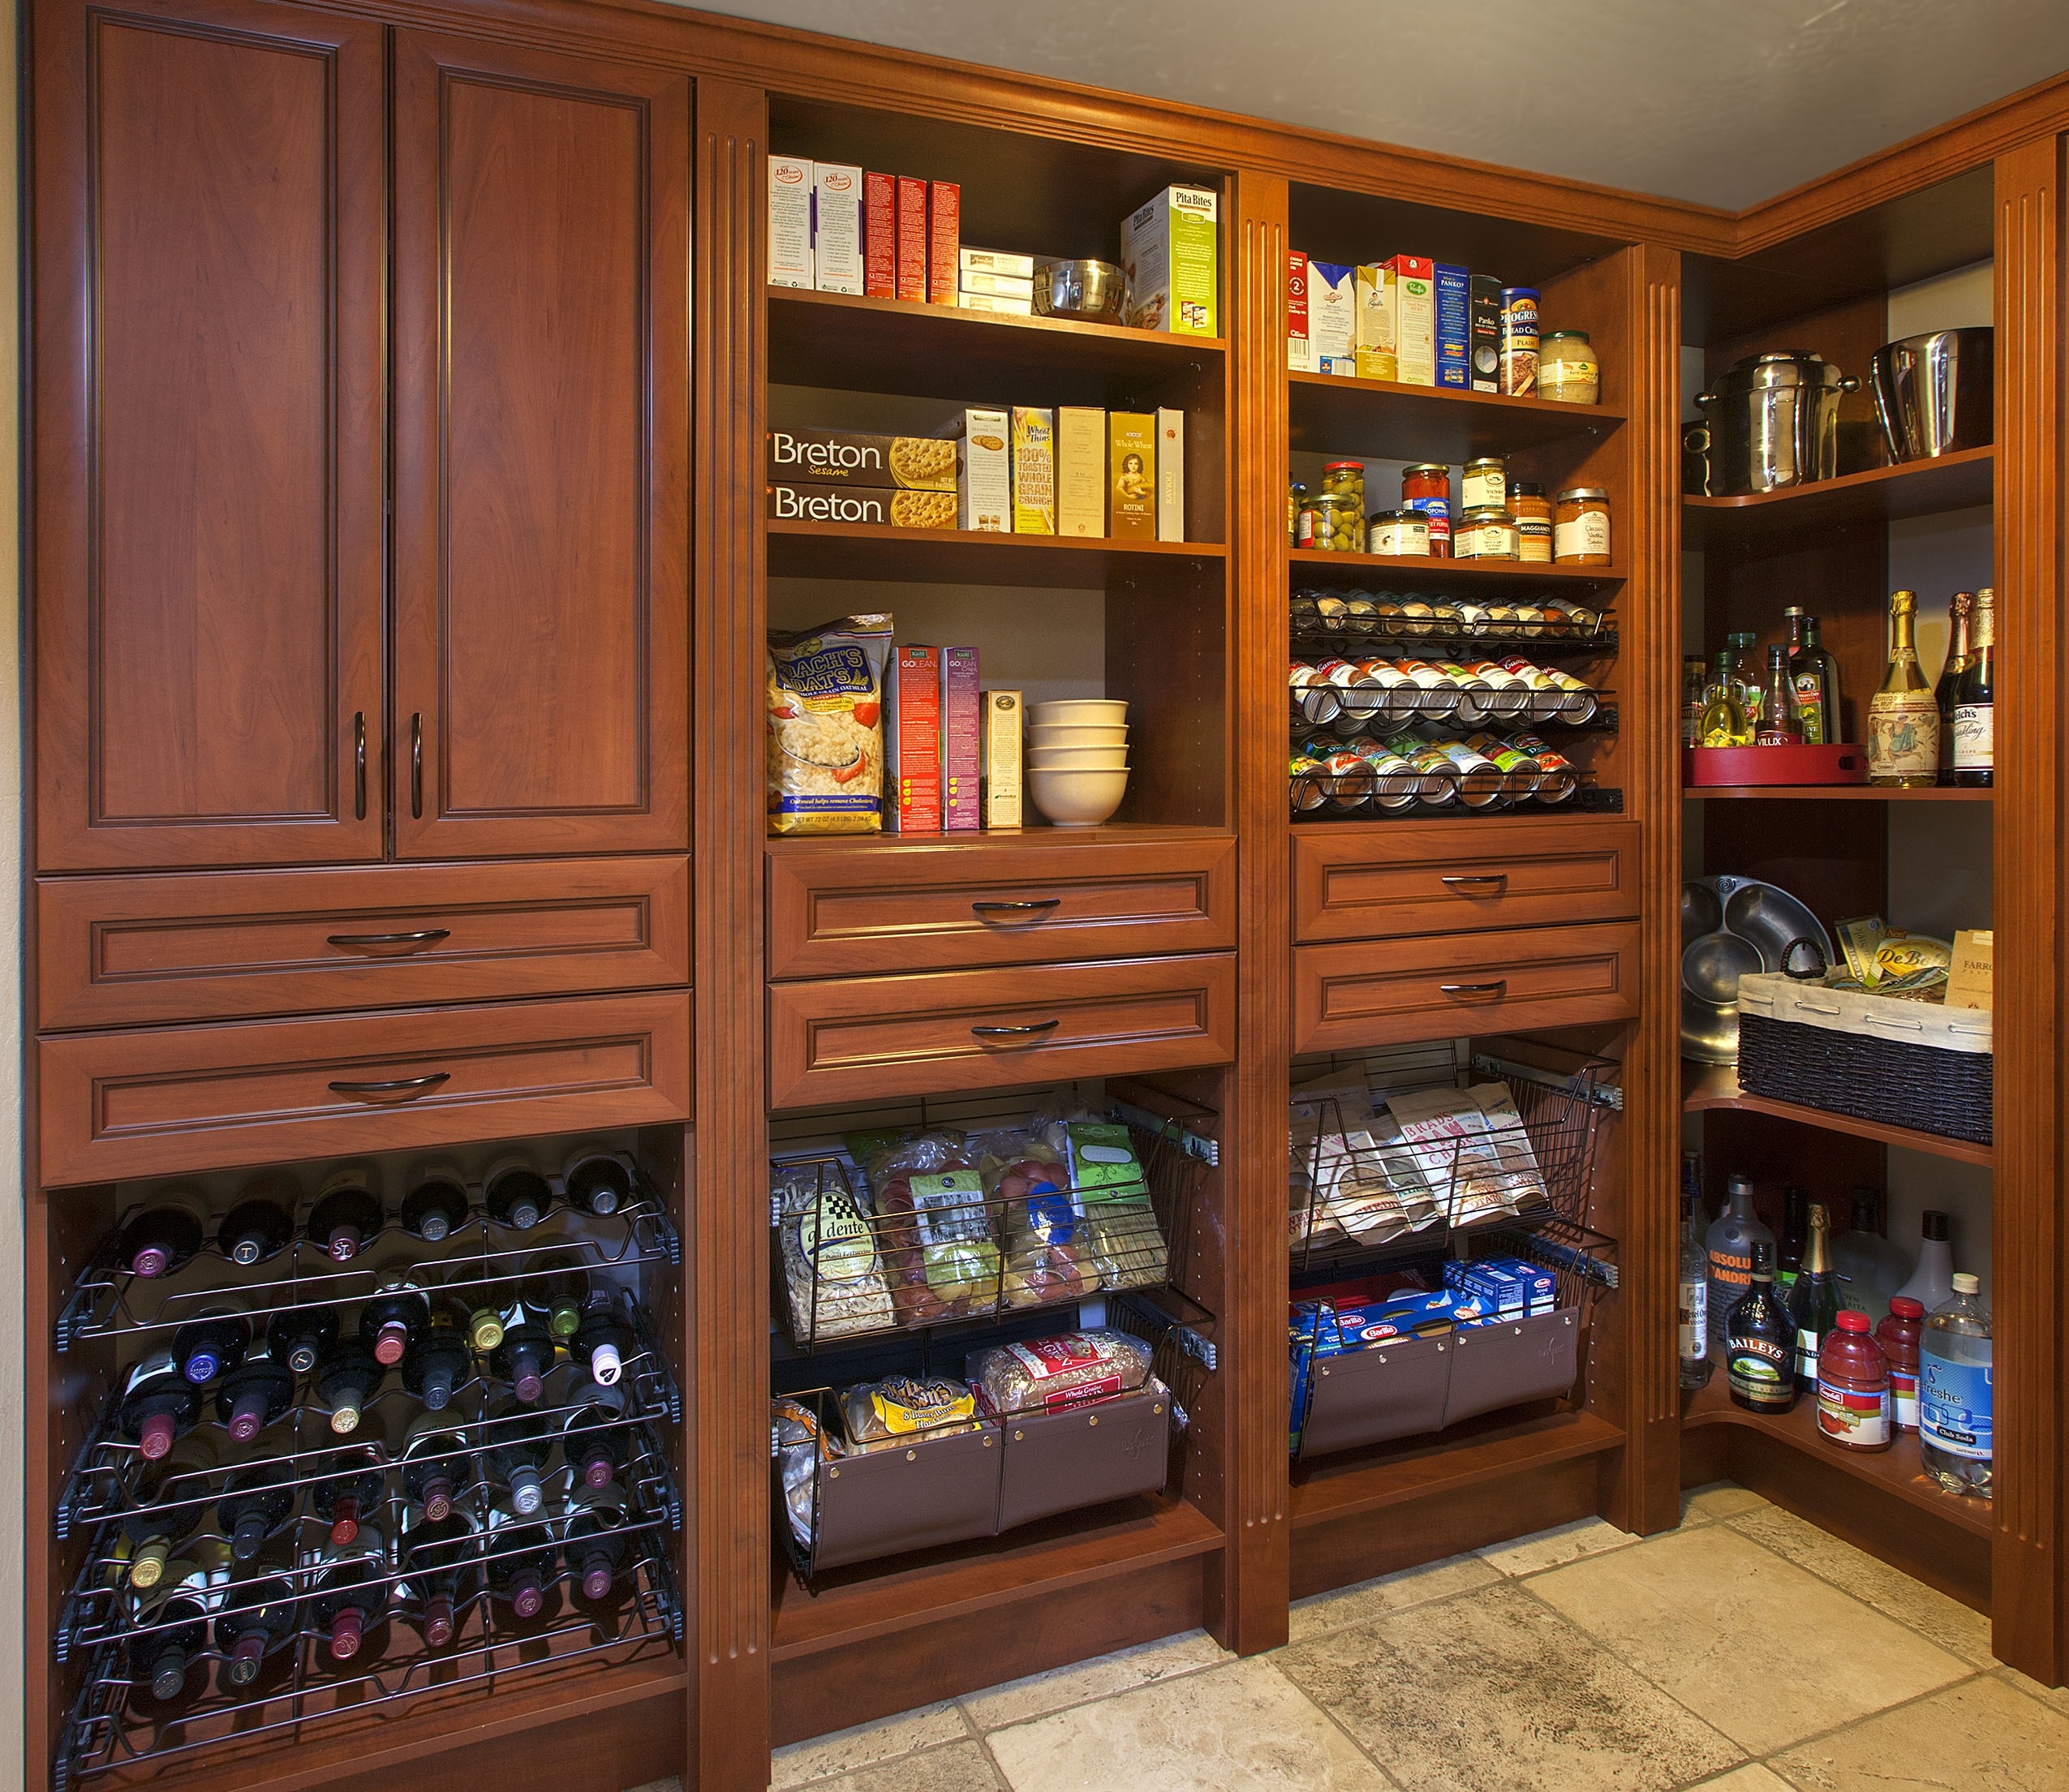 Warm-Cognac-Pantry-in-Premier-with-Wine-Spice-Basket-Slide-Outs-Neil-20131-694359-edited